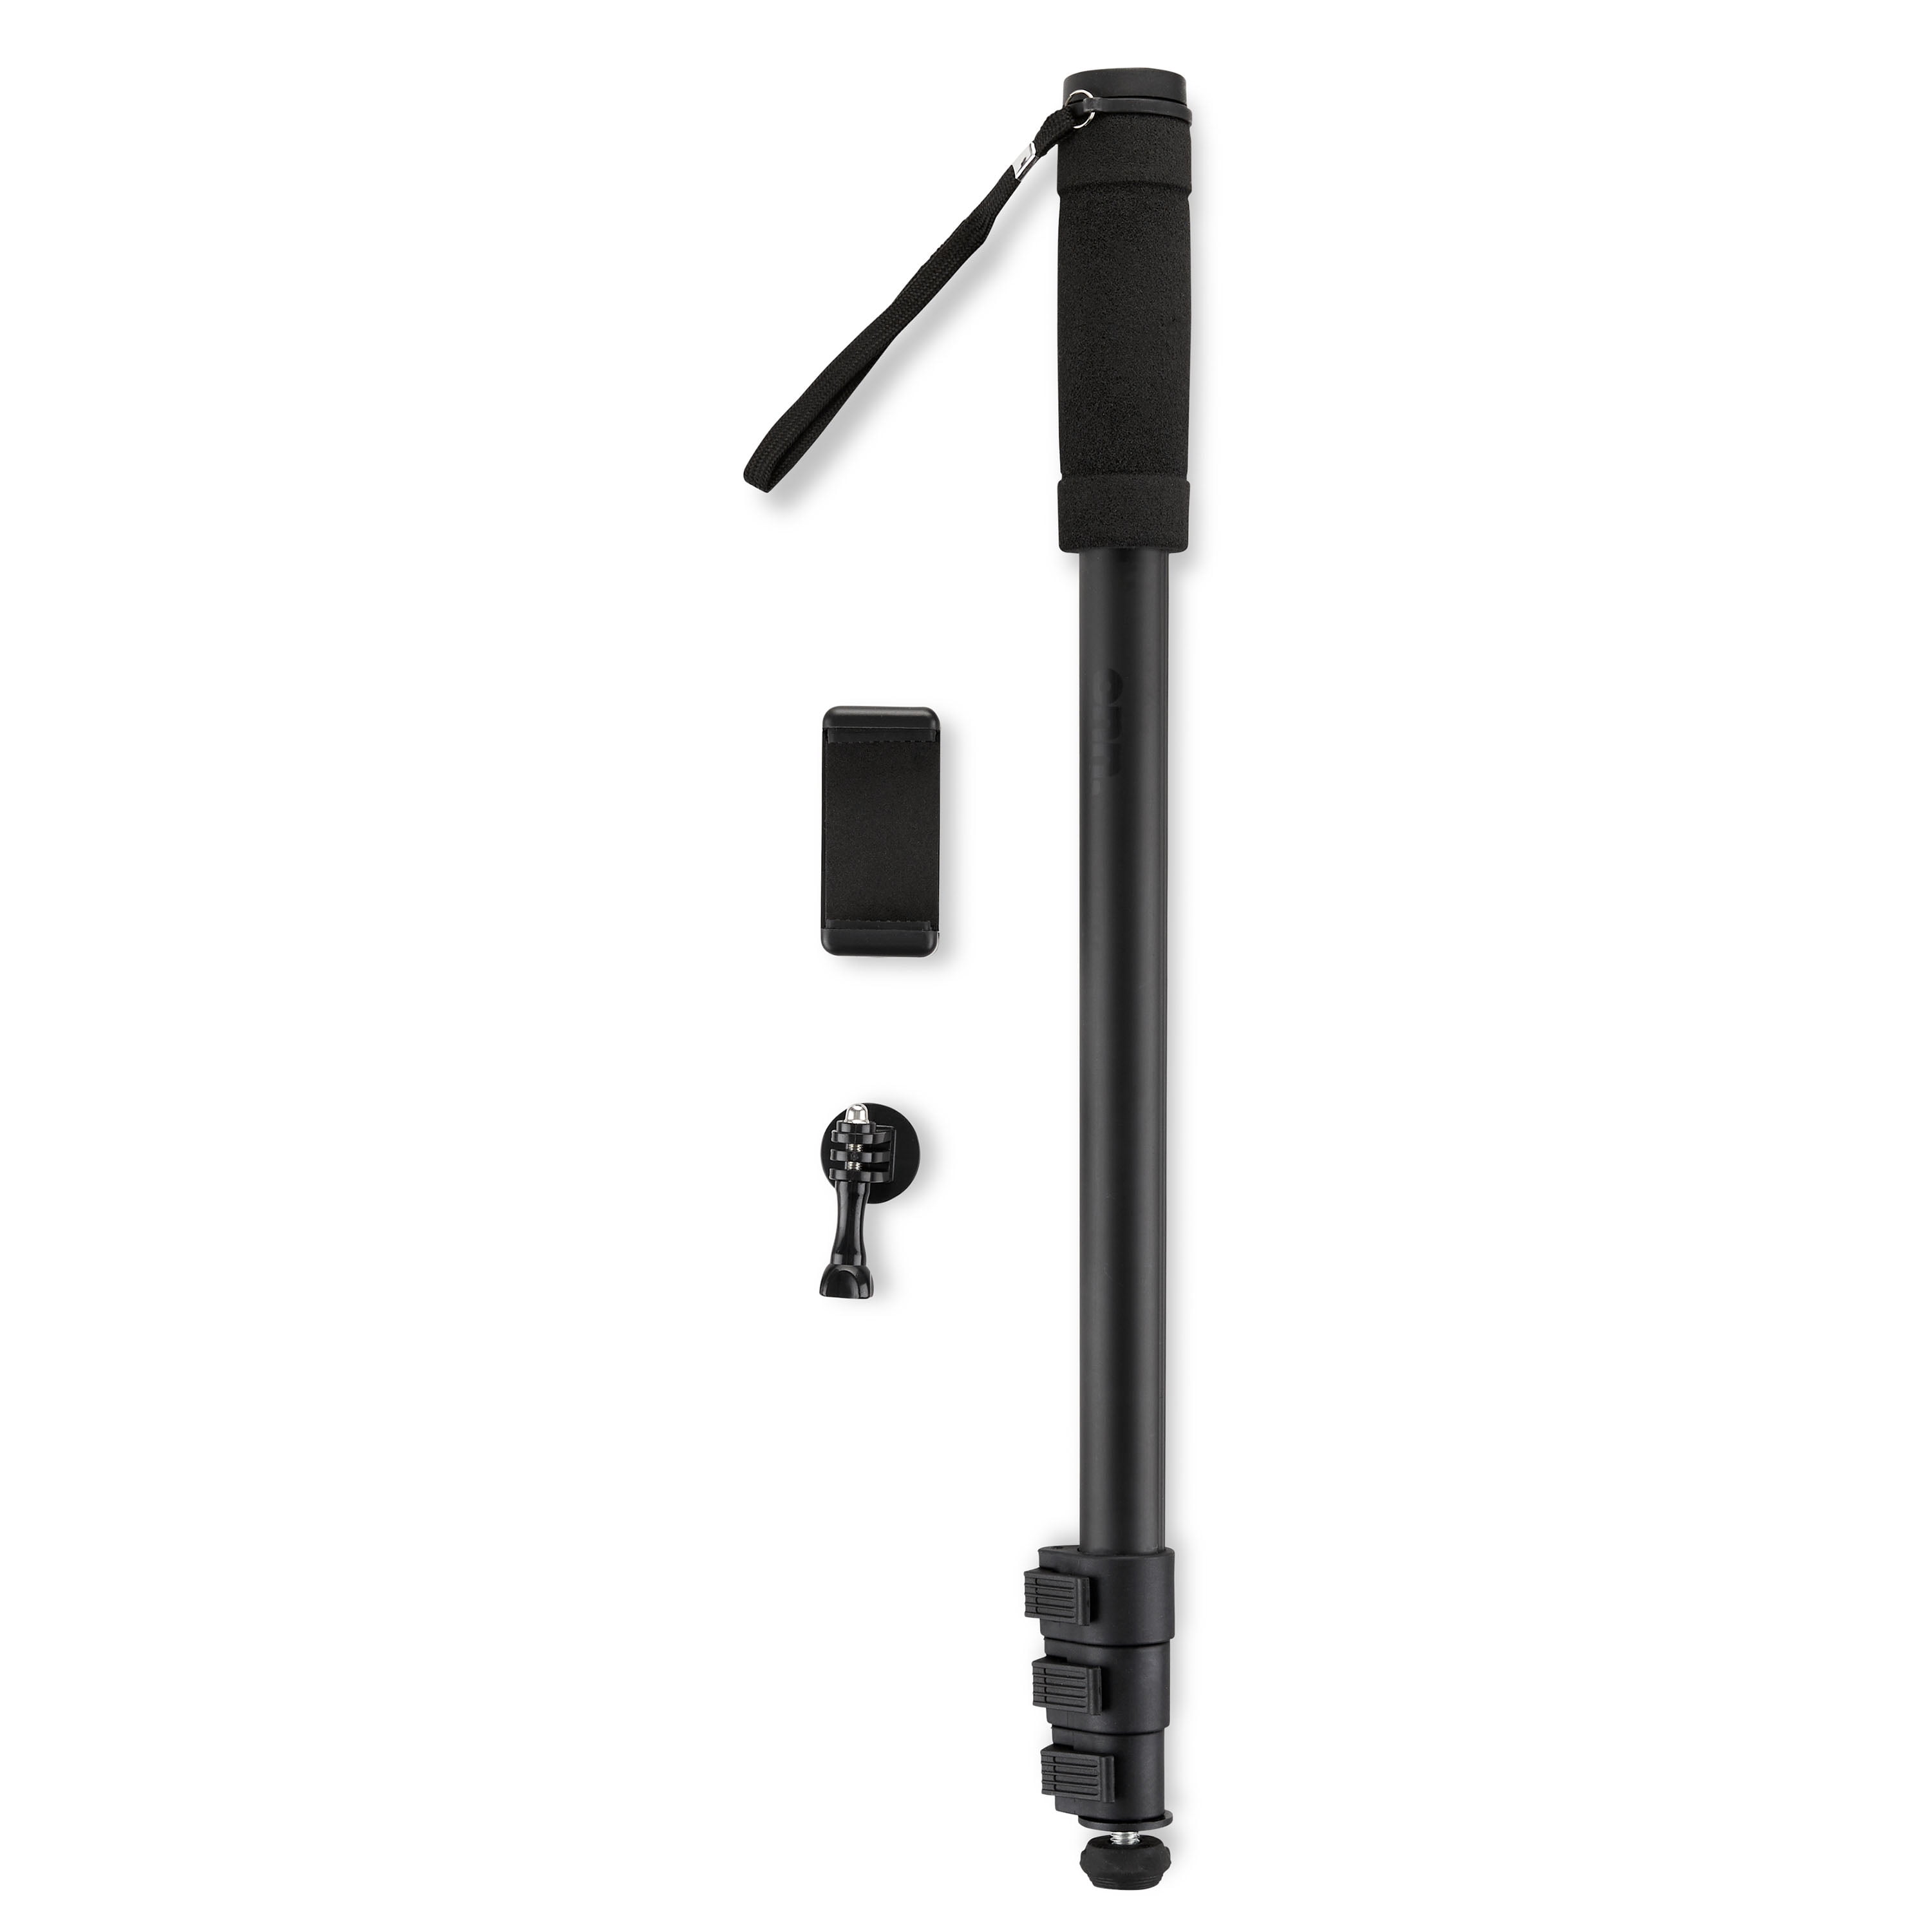 onn. 67-inch Monopod with Smartphone Mount for DSLR Cameras, Smartphones, and GoPro Action Cameras for Photography, Black